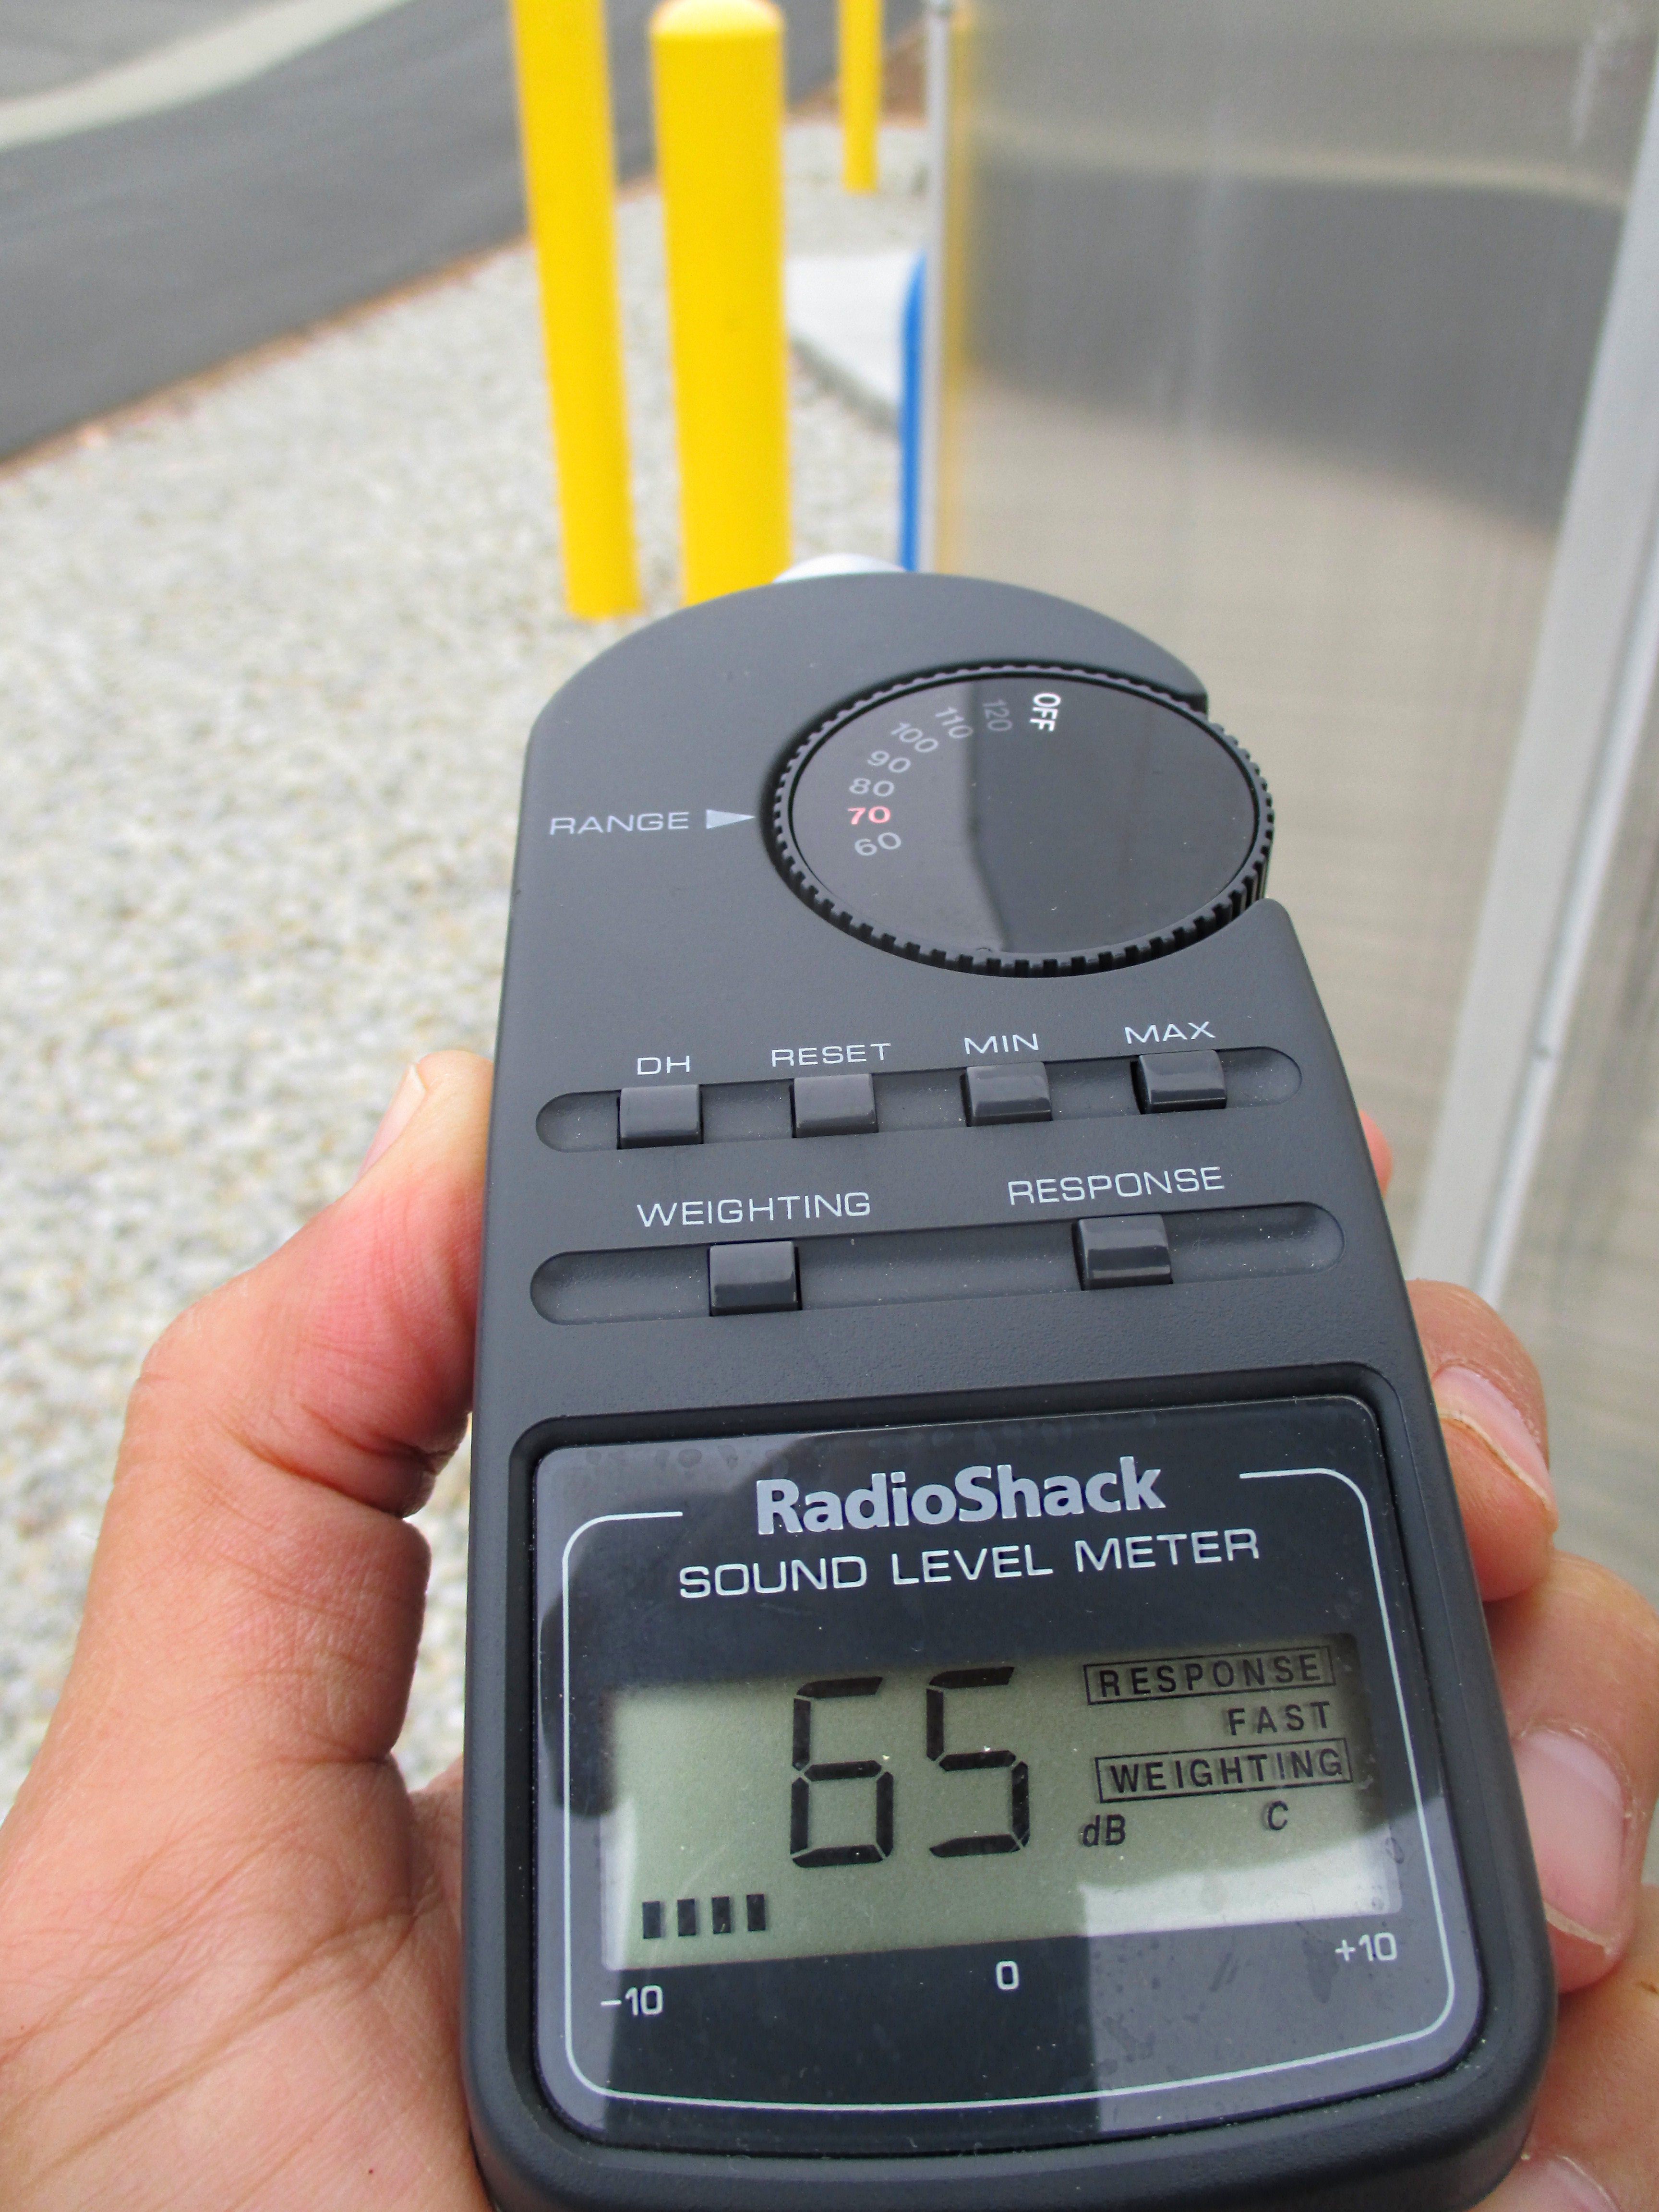 Sound meter reading outside enclosure